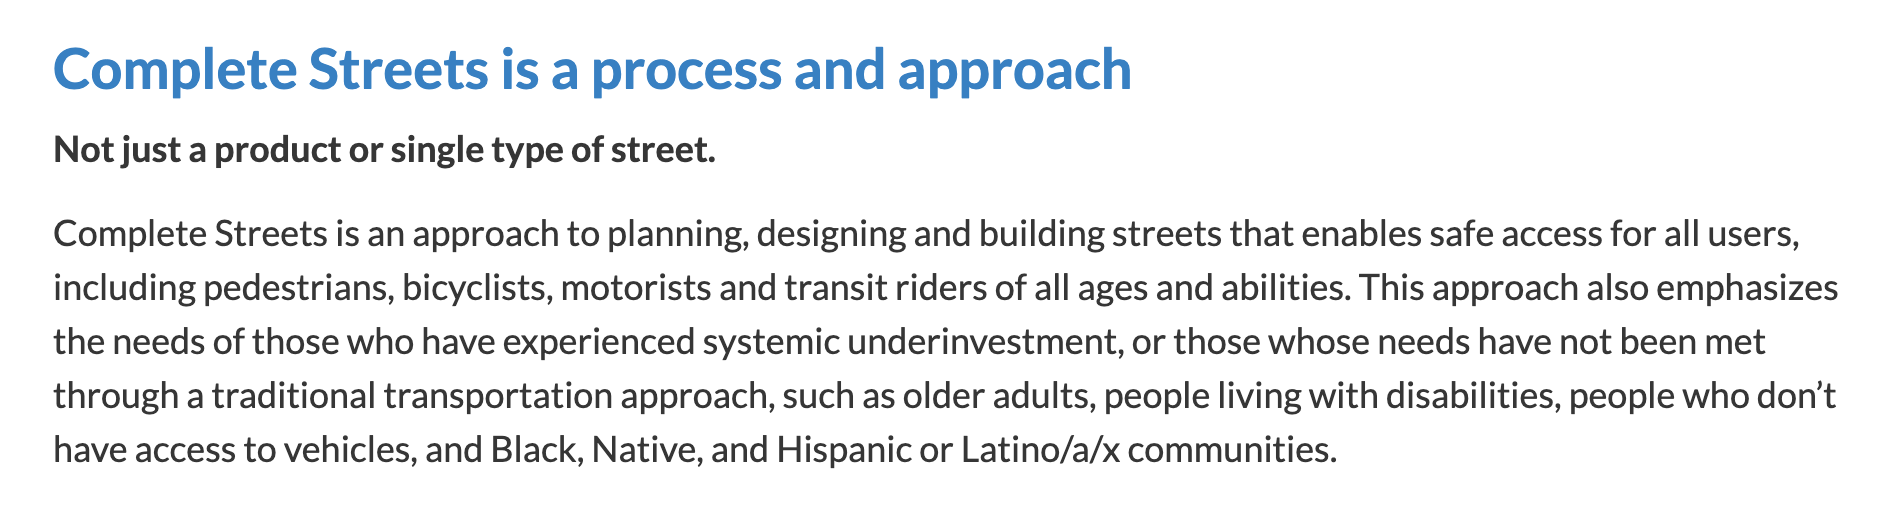 Screenshot that says: Complete Streets is a process and approach. Not just a product or single type of street. Complete Streets is an approach to planning, designing and building streets that enables safe access for all users, including pedestrians, bicyclists, motorists and transit riders of all ages and abilities. This approach also emphasizes the needs of those who have experienced systemic underinvestment, or those whose needs have not been met through a traditional transportation approach, such as older adults, people living with disabilities, people who don’t have access to vehicles, and Black, Native, and Hispanic or Latino/a/x communities.